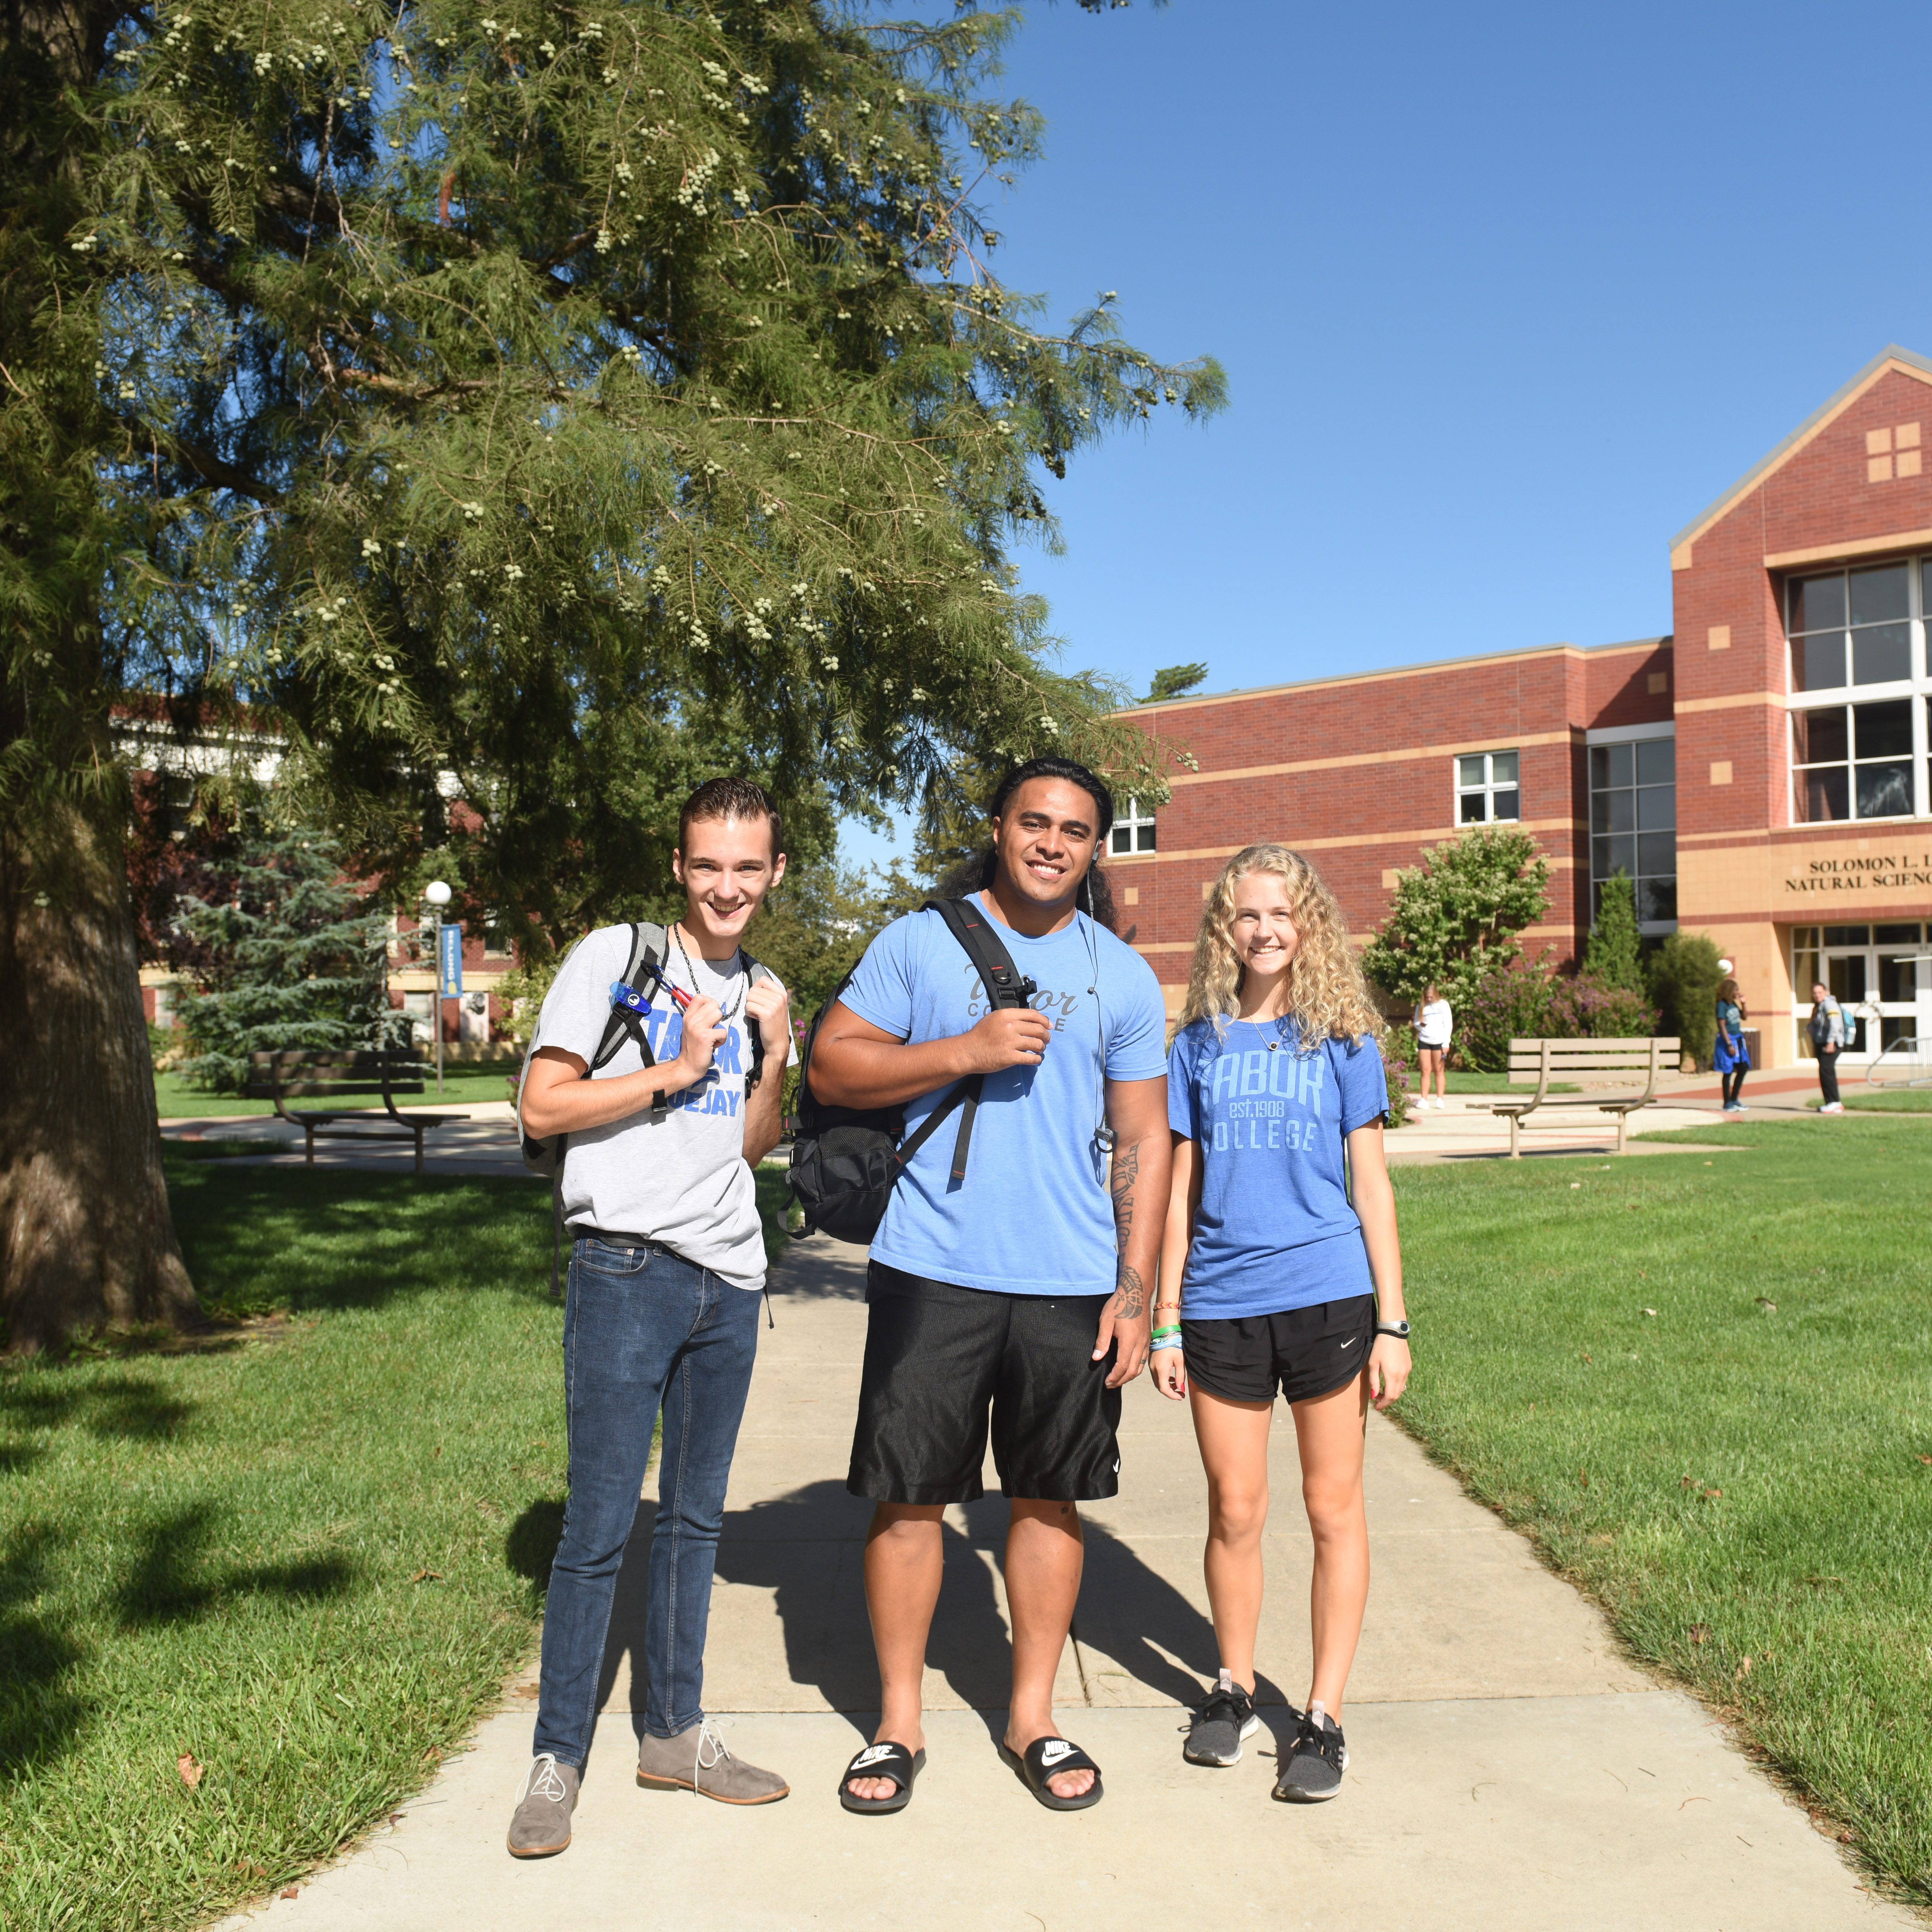 Students pose on campus